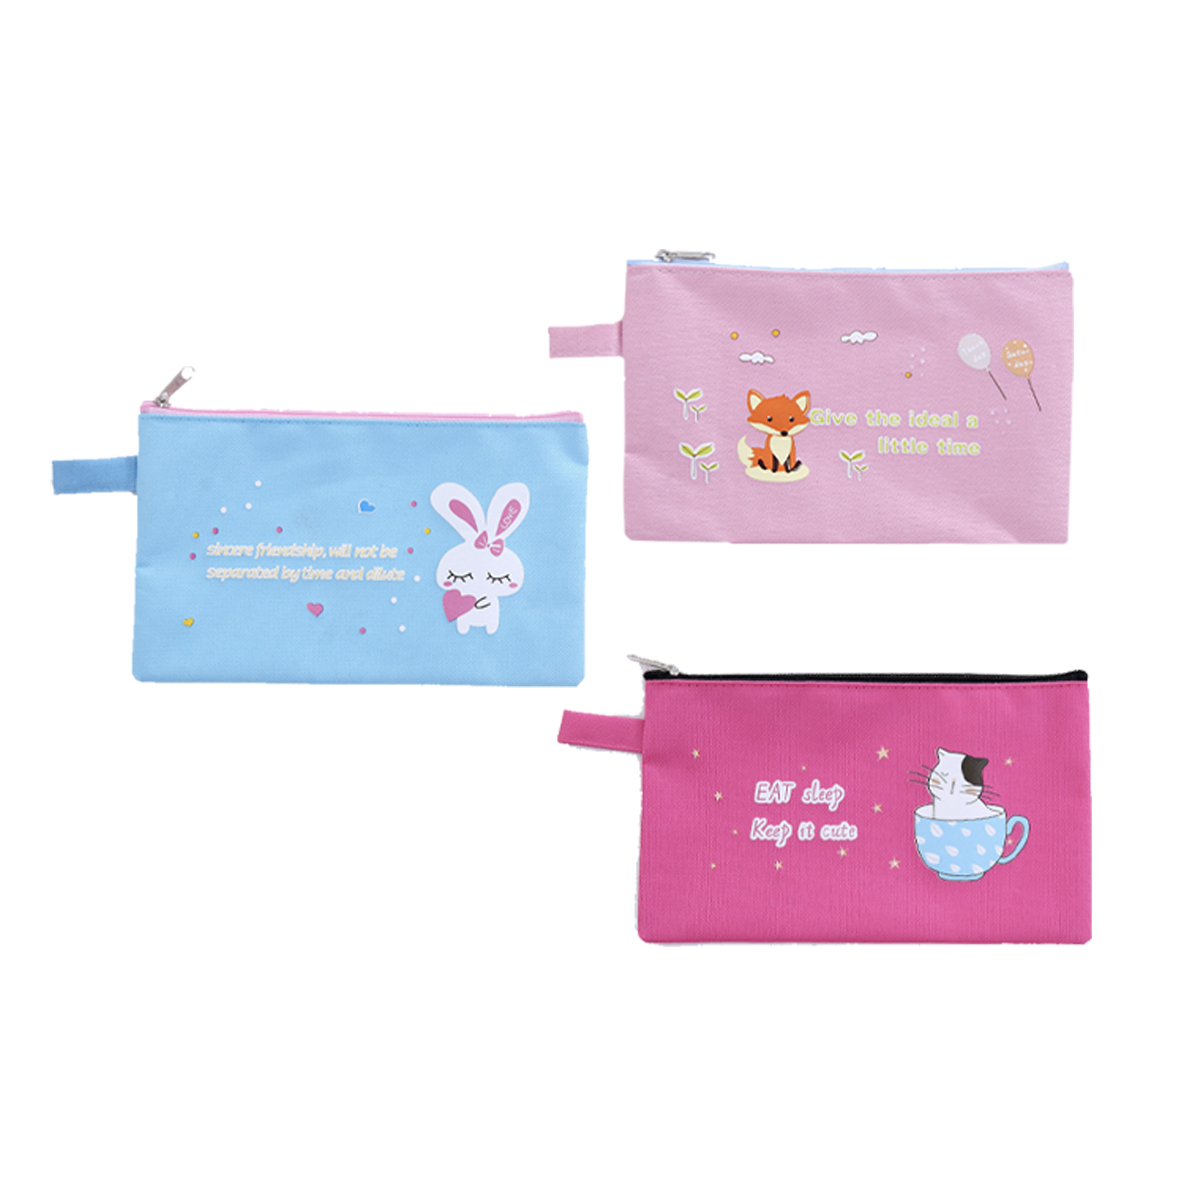 Zipped Stationery Pouch